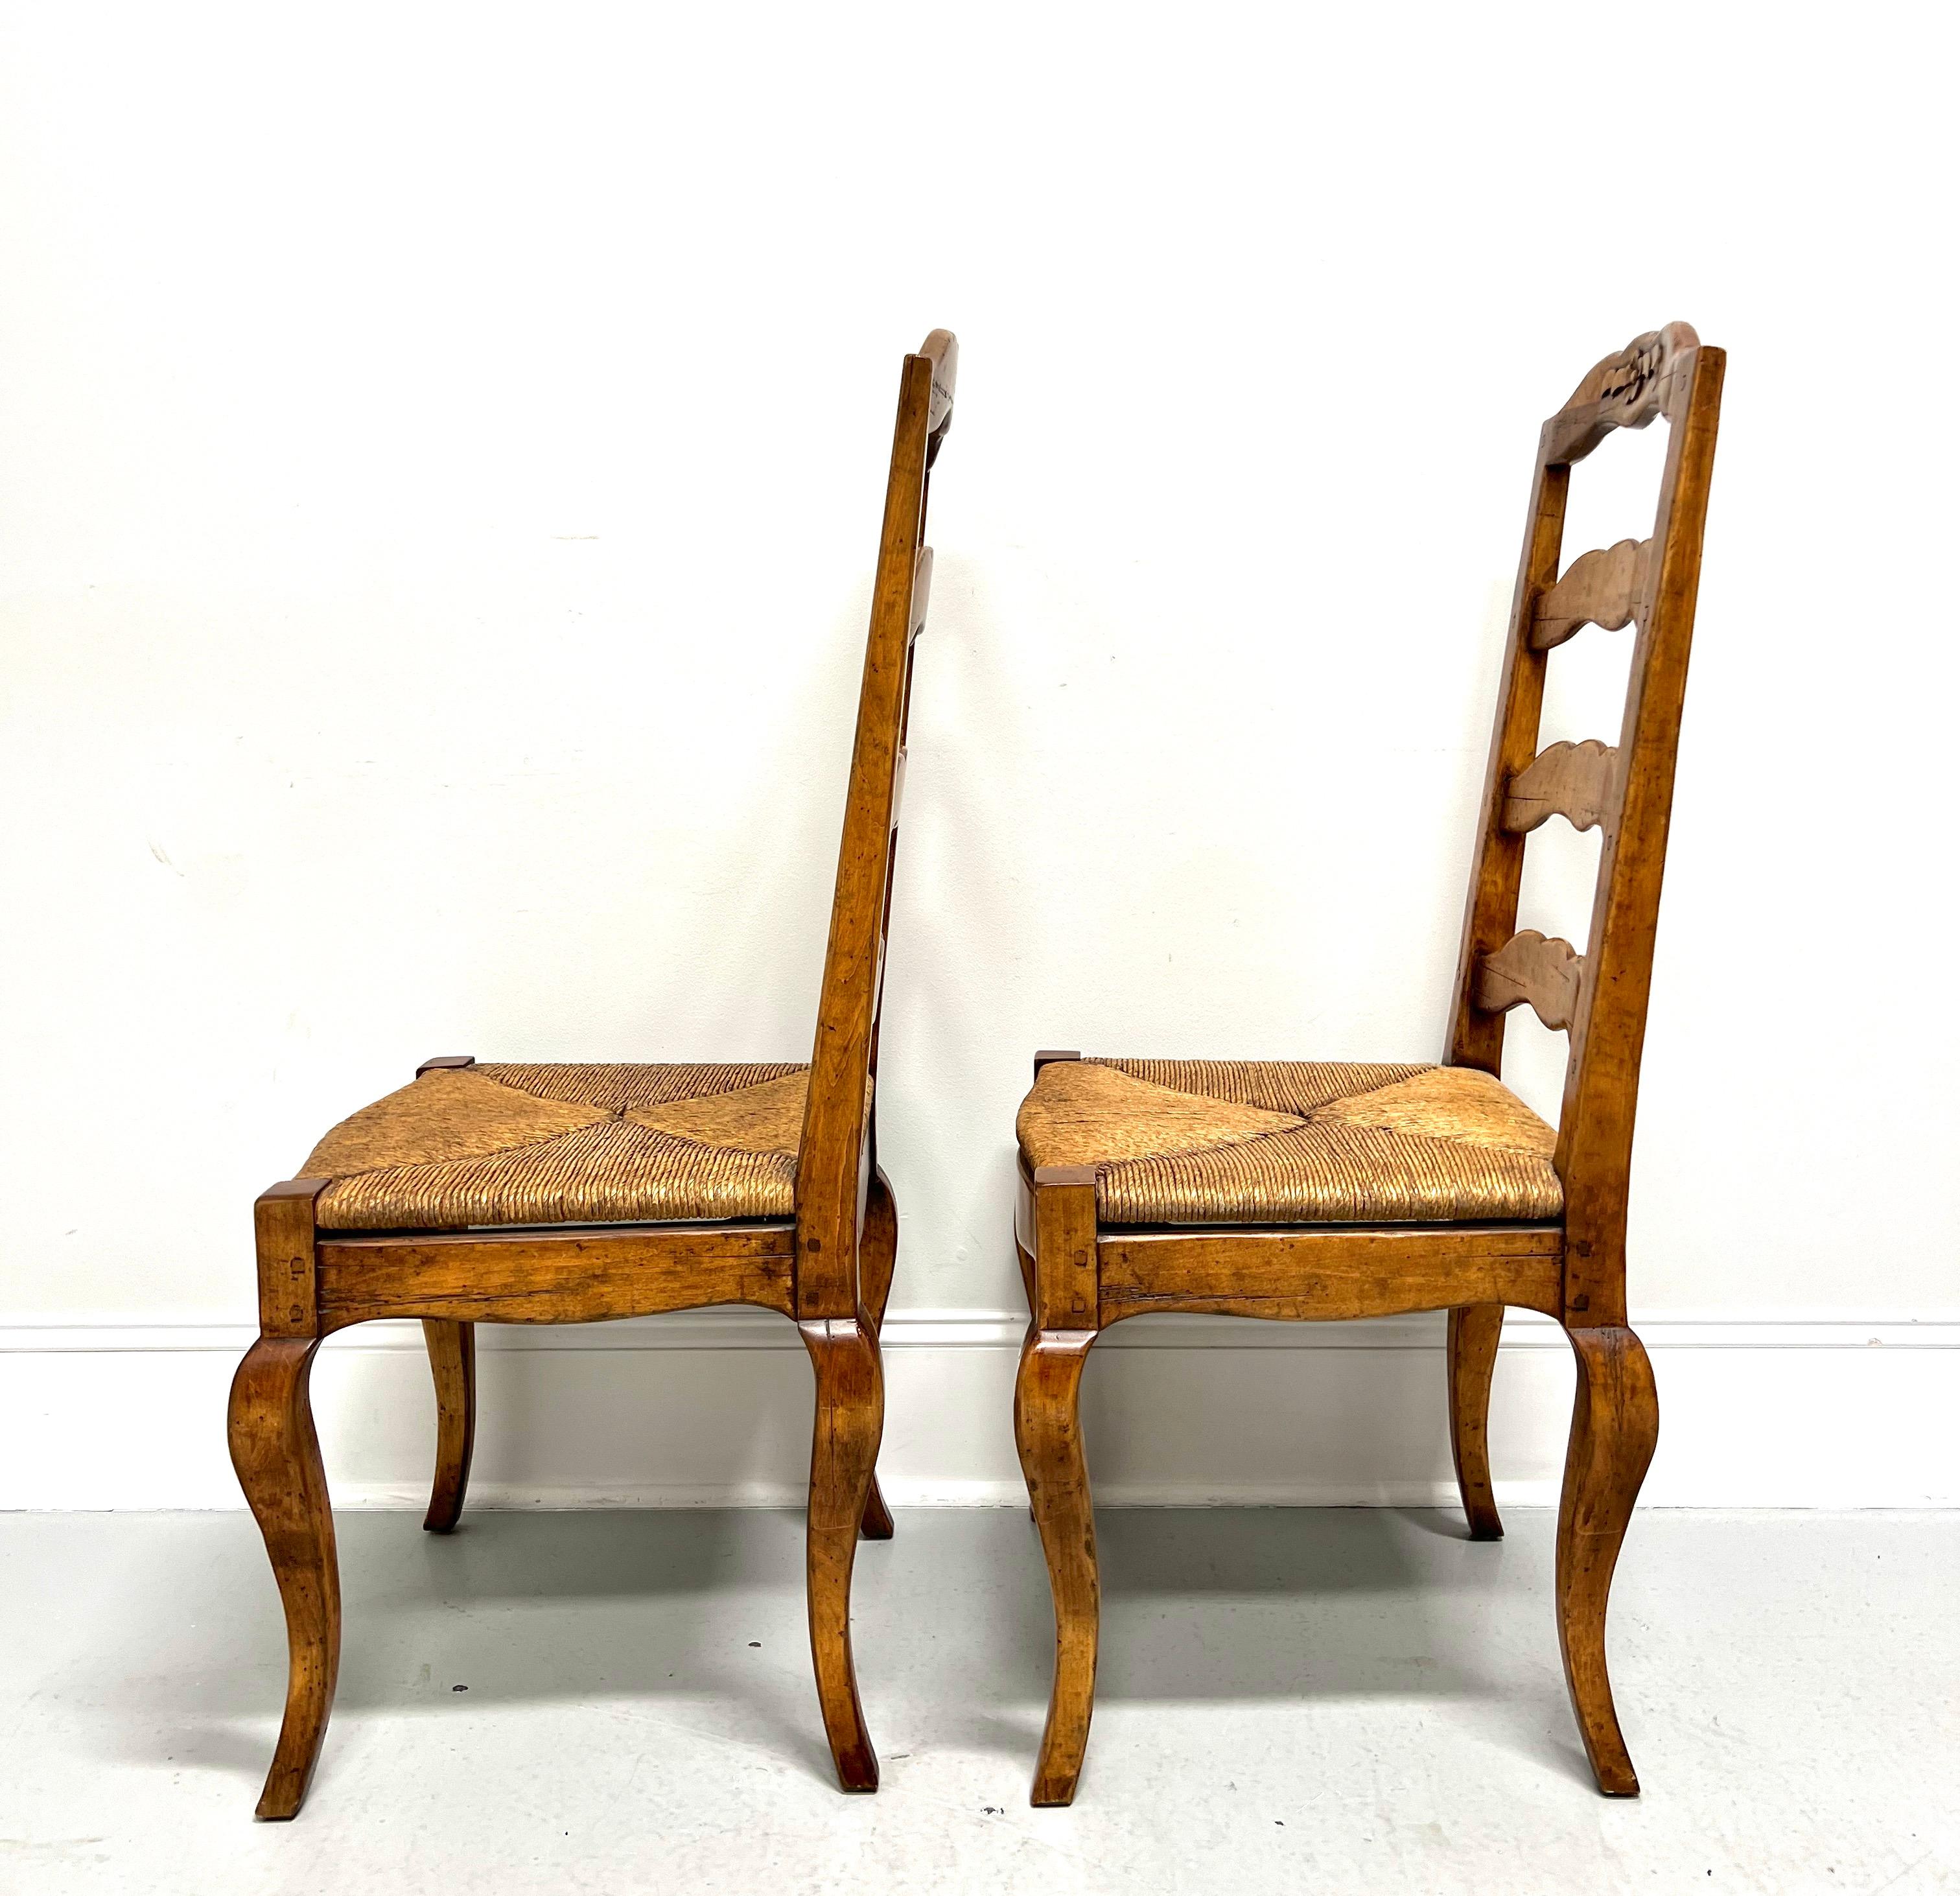 Late 20th C. Distressed French Country Dining Side Chairs w/ Rush Seats - Pair A In Good Condition For Sale In Charlotte, NC